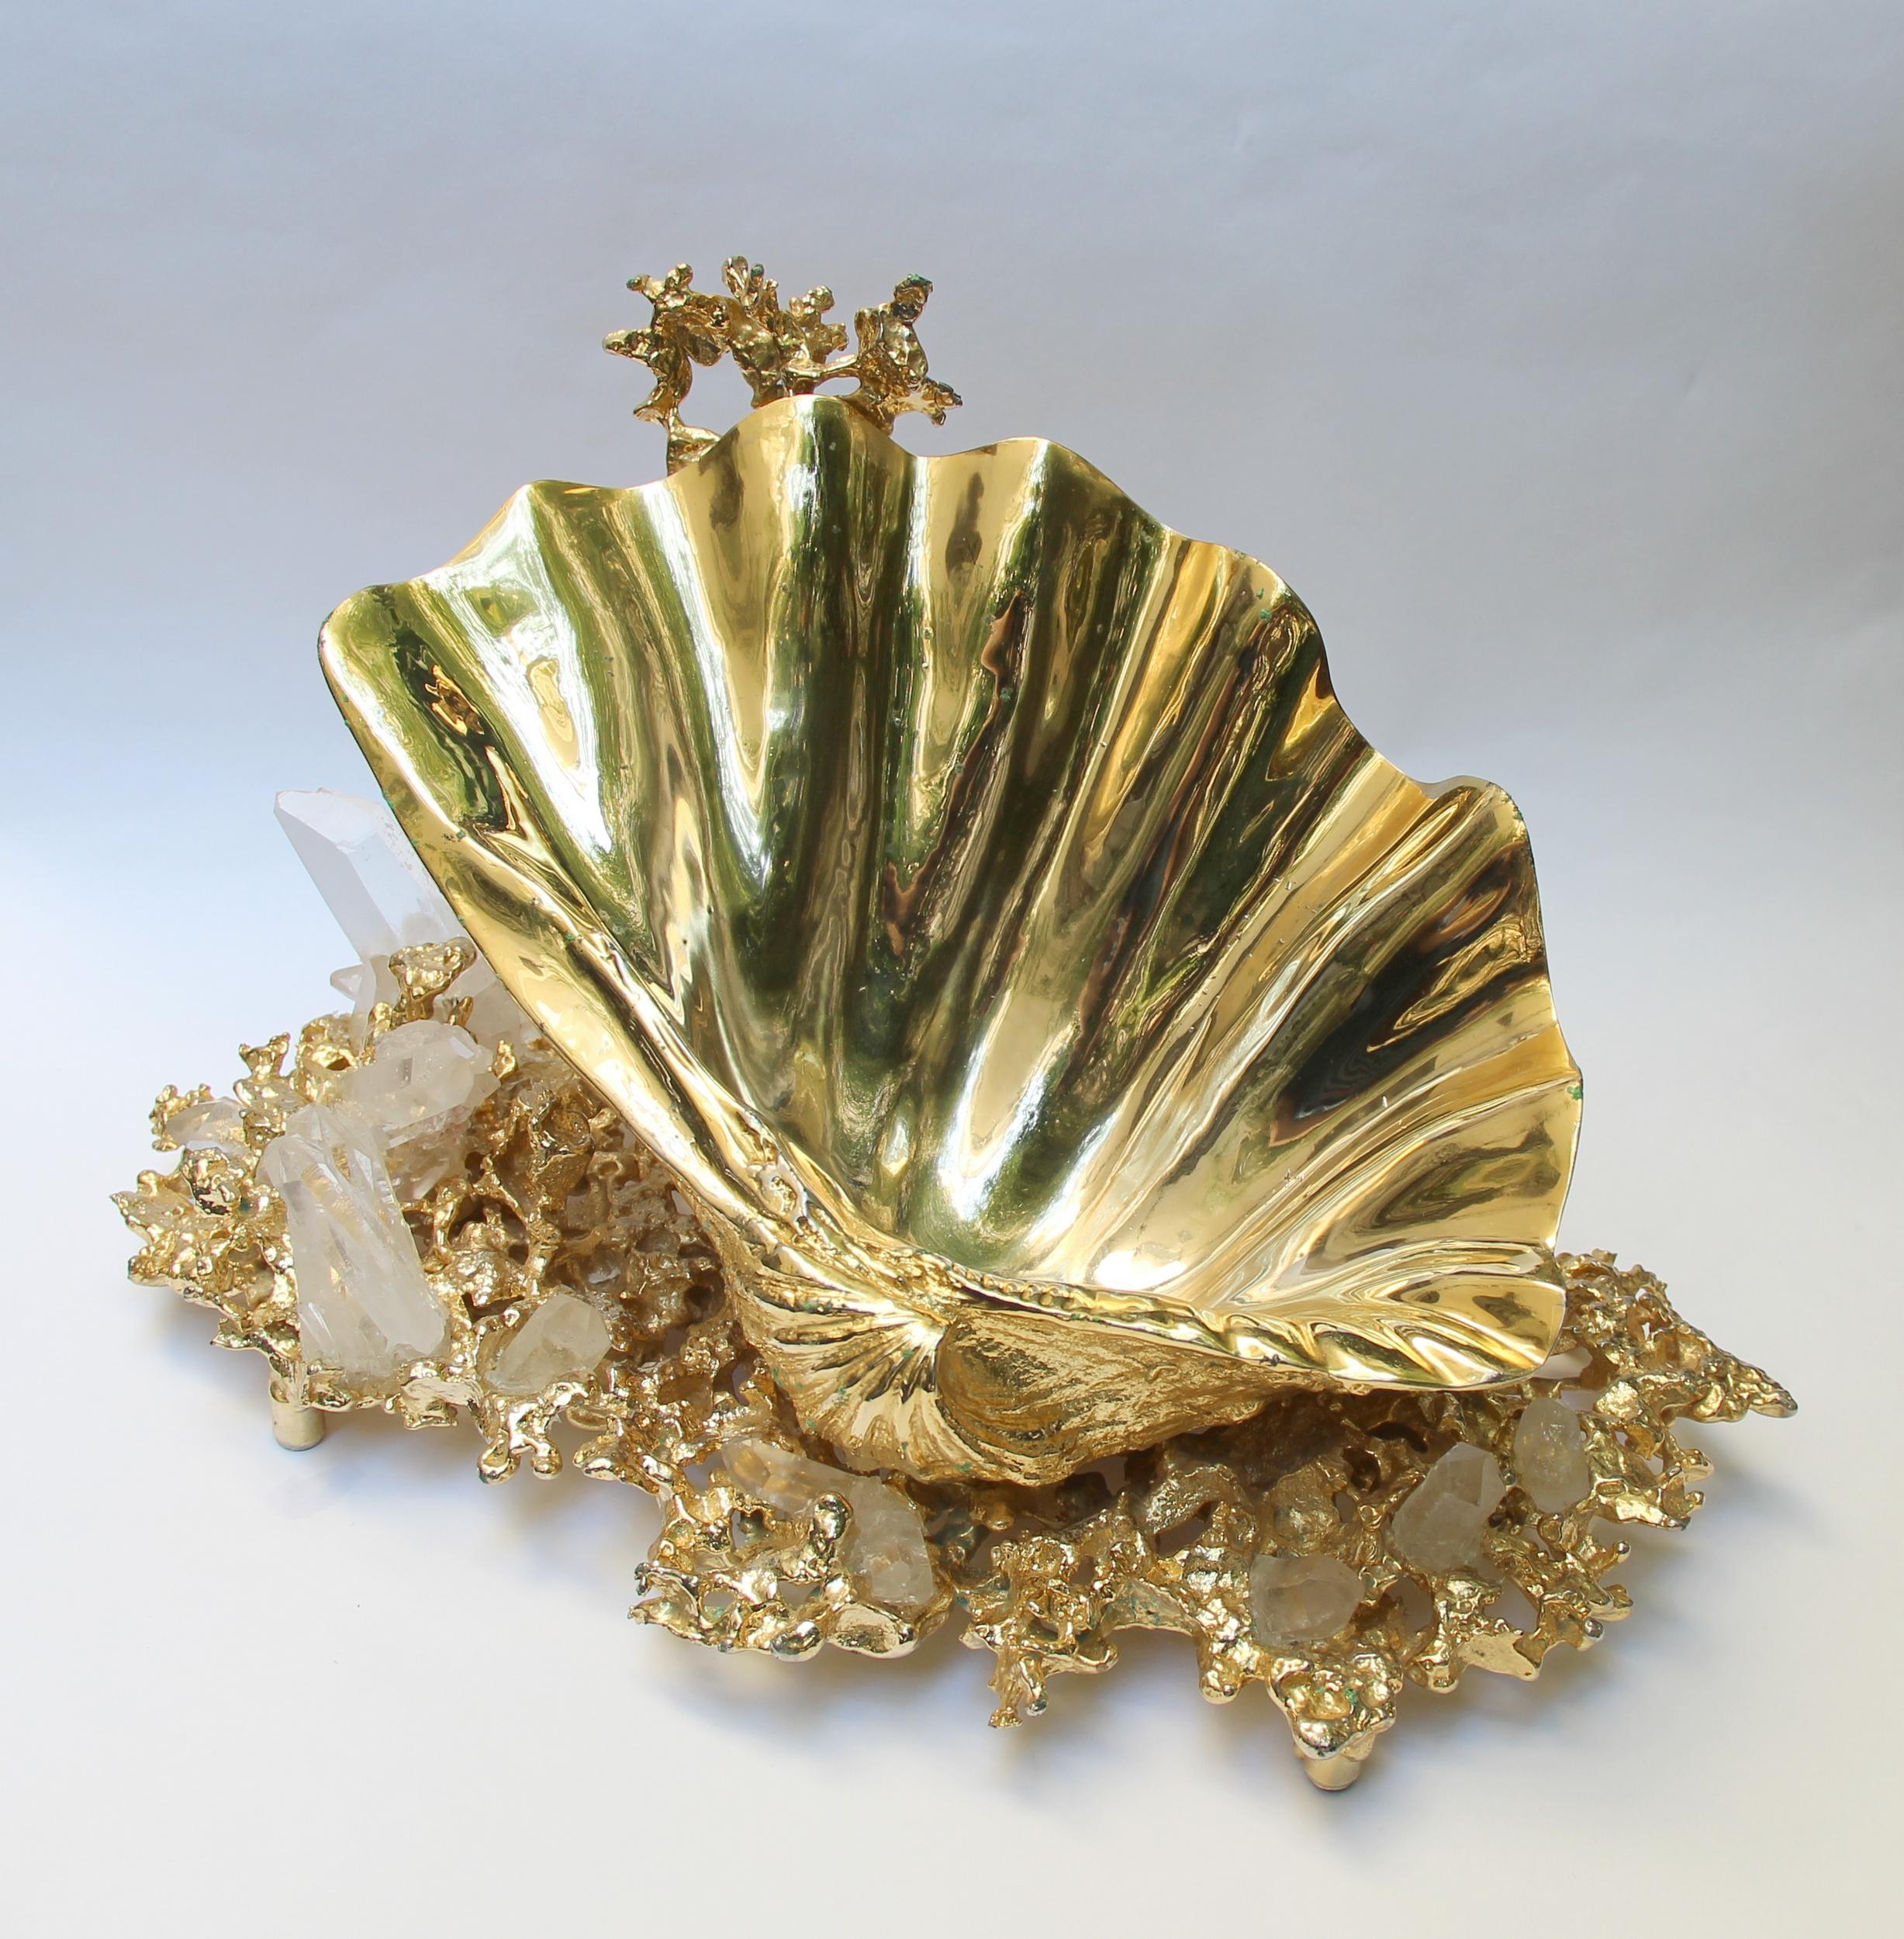 Seashell, bag holder or centerpiece in gilded bronze and rock crystals.

Biography

Claude Victor Boeltz, France (1937)

Claude-Victor Boeltz, is born in 1937 in Paris. Complete artist (sculpture, painting, foundry, pottery, ironwork), « meilleur